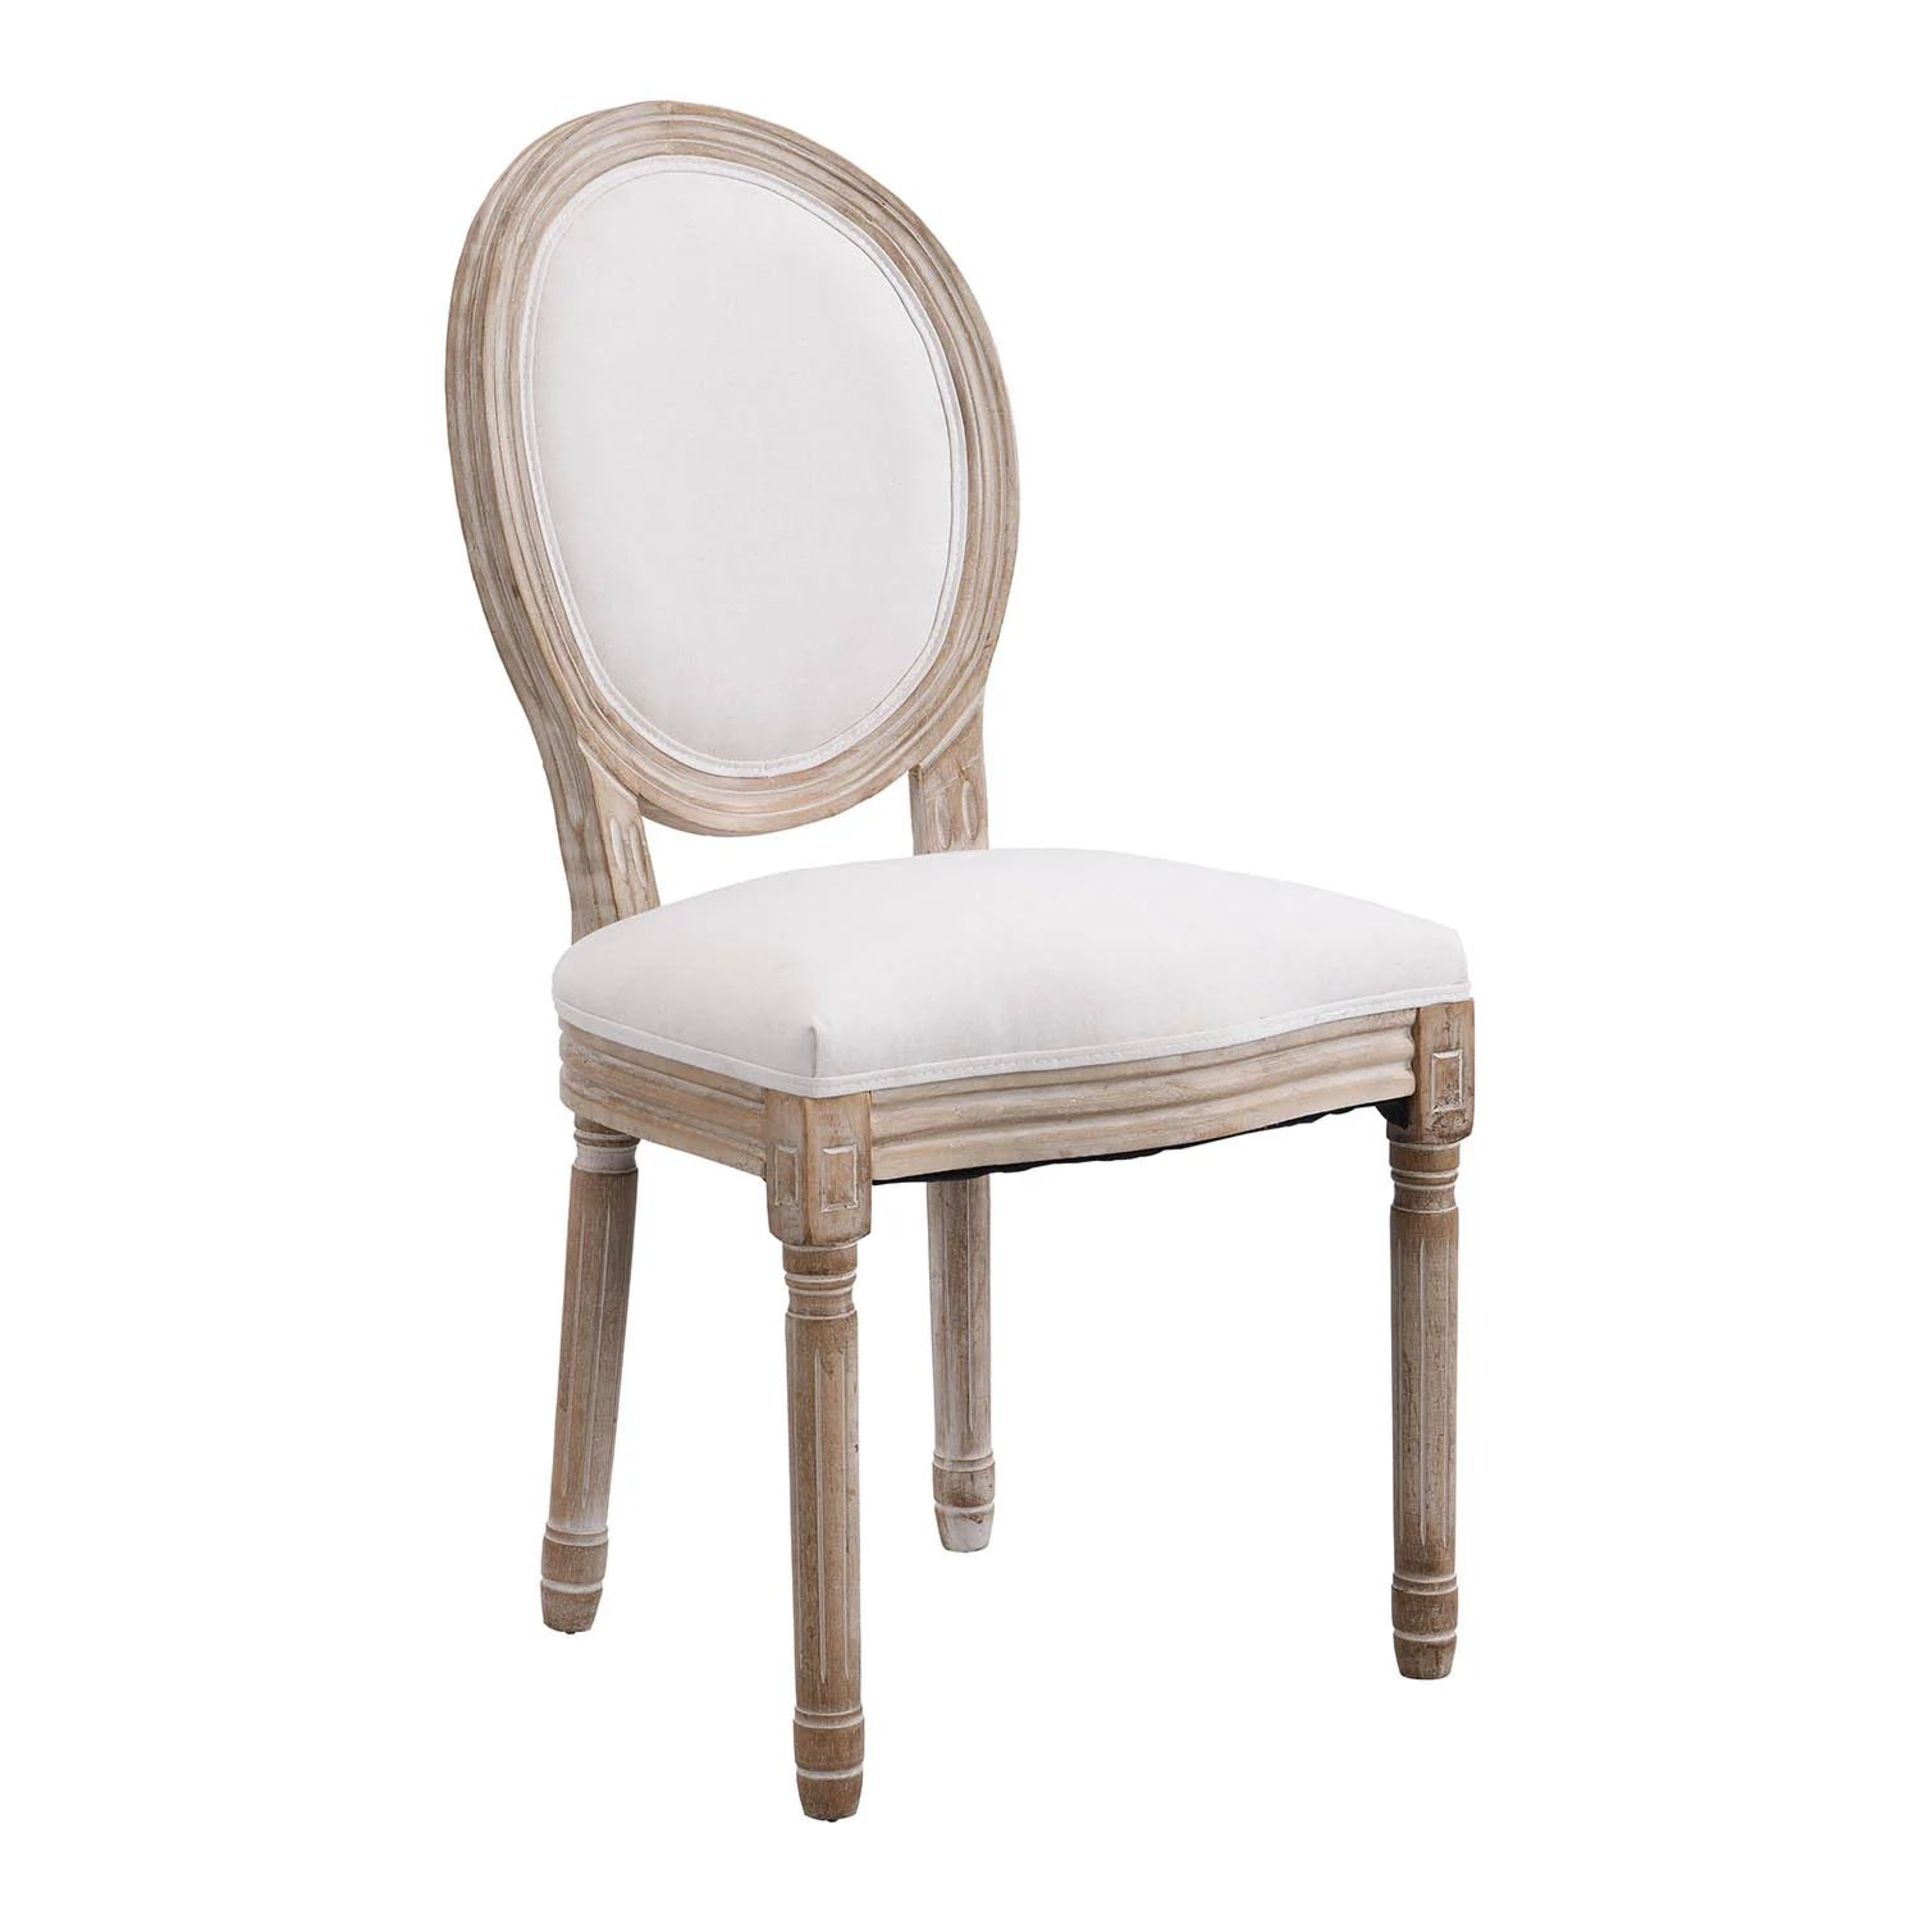 Lainston Set of 2 Classic Limewashed Wooden Dining Chairs, Beige. - ER29. RRP £299.99. Inspired by - Bild 2 aus 2